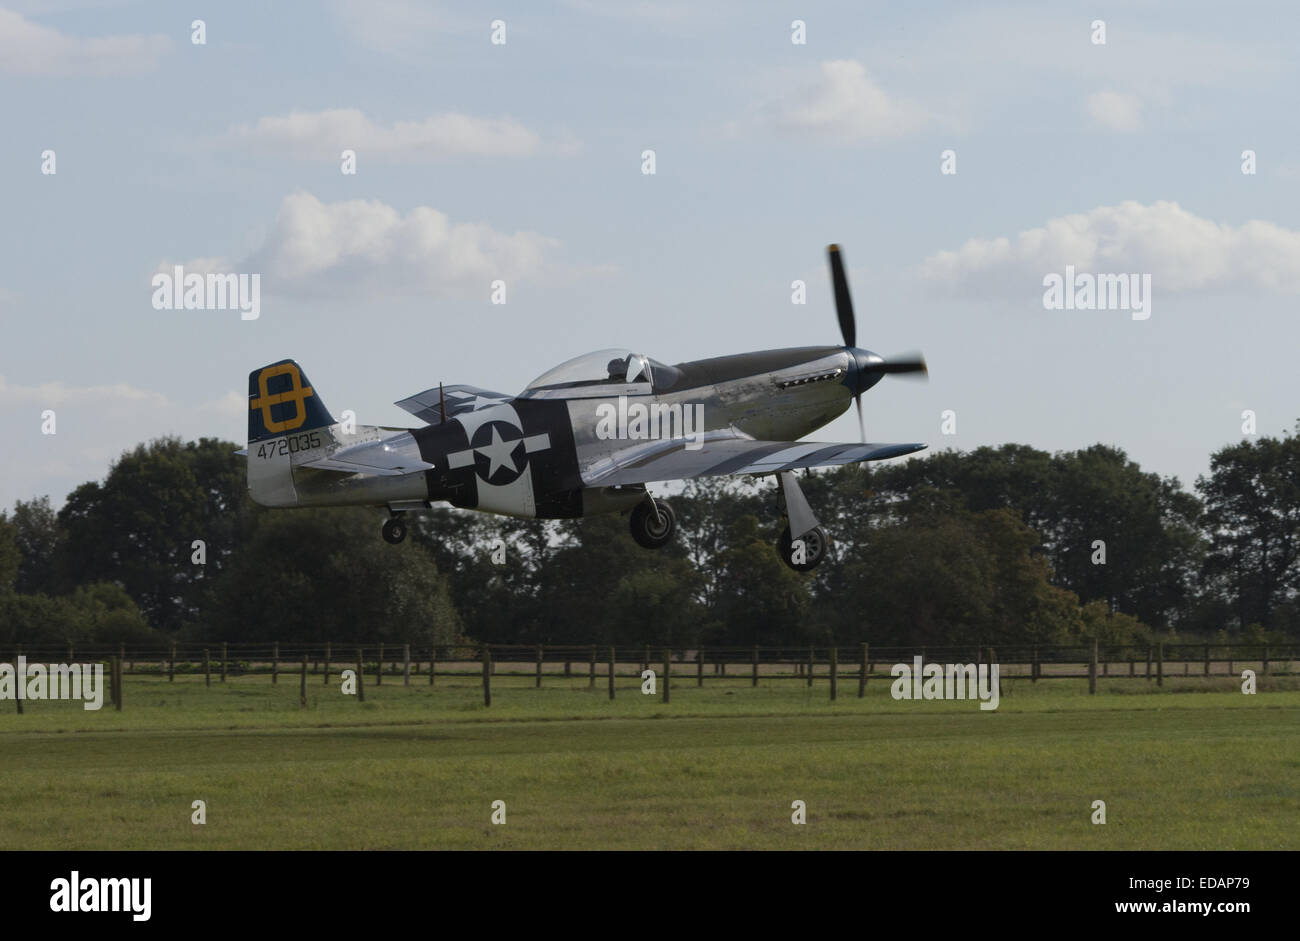 P51 Mustang taking off from a grass runway Stock Photo